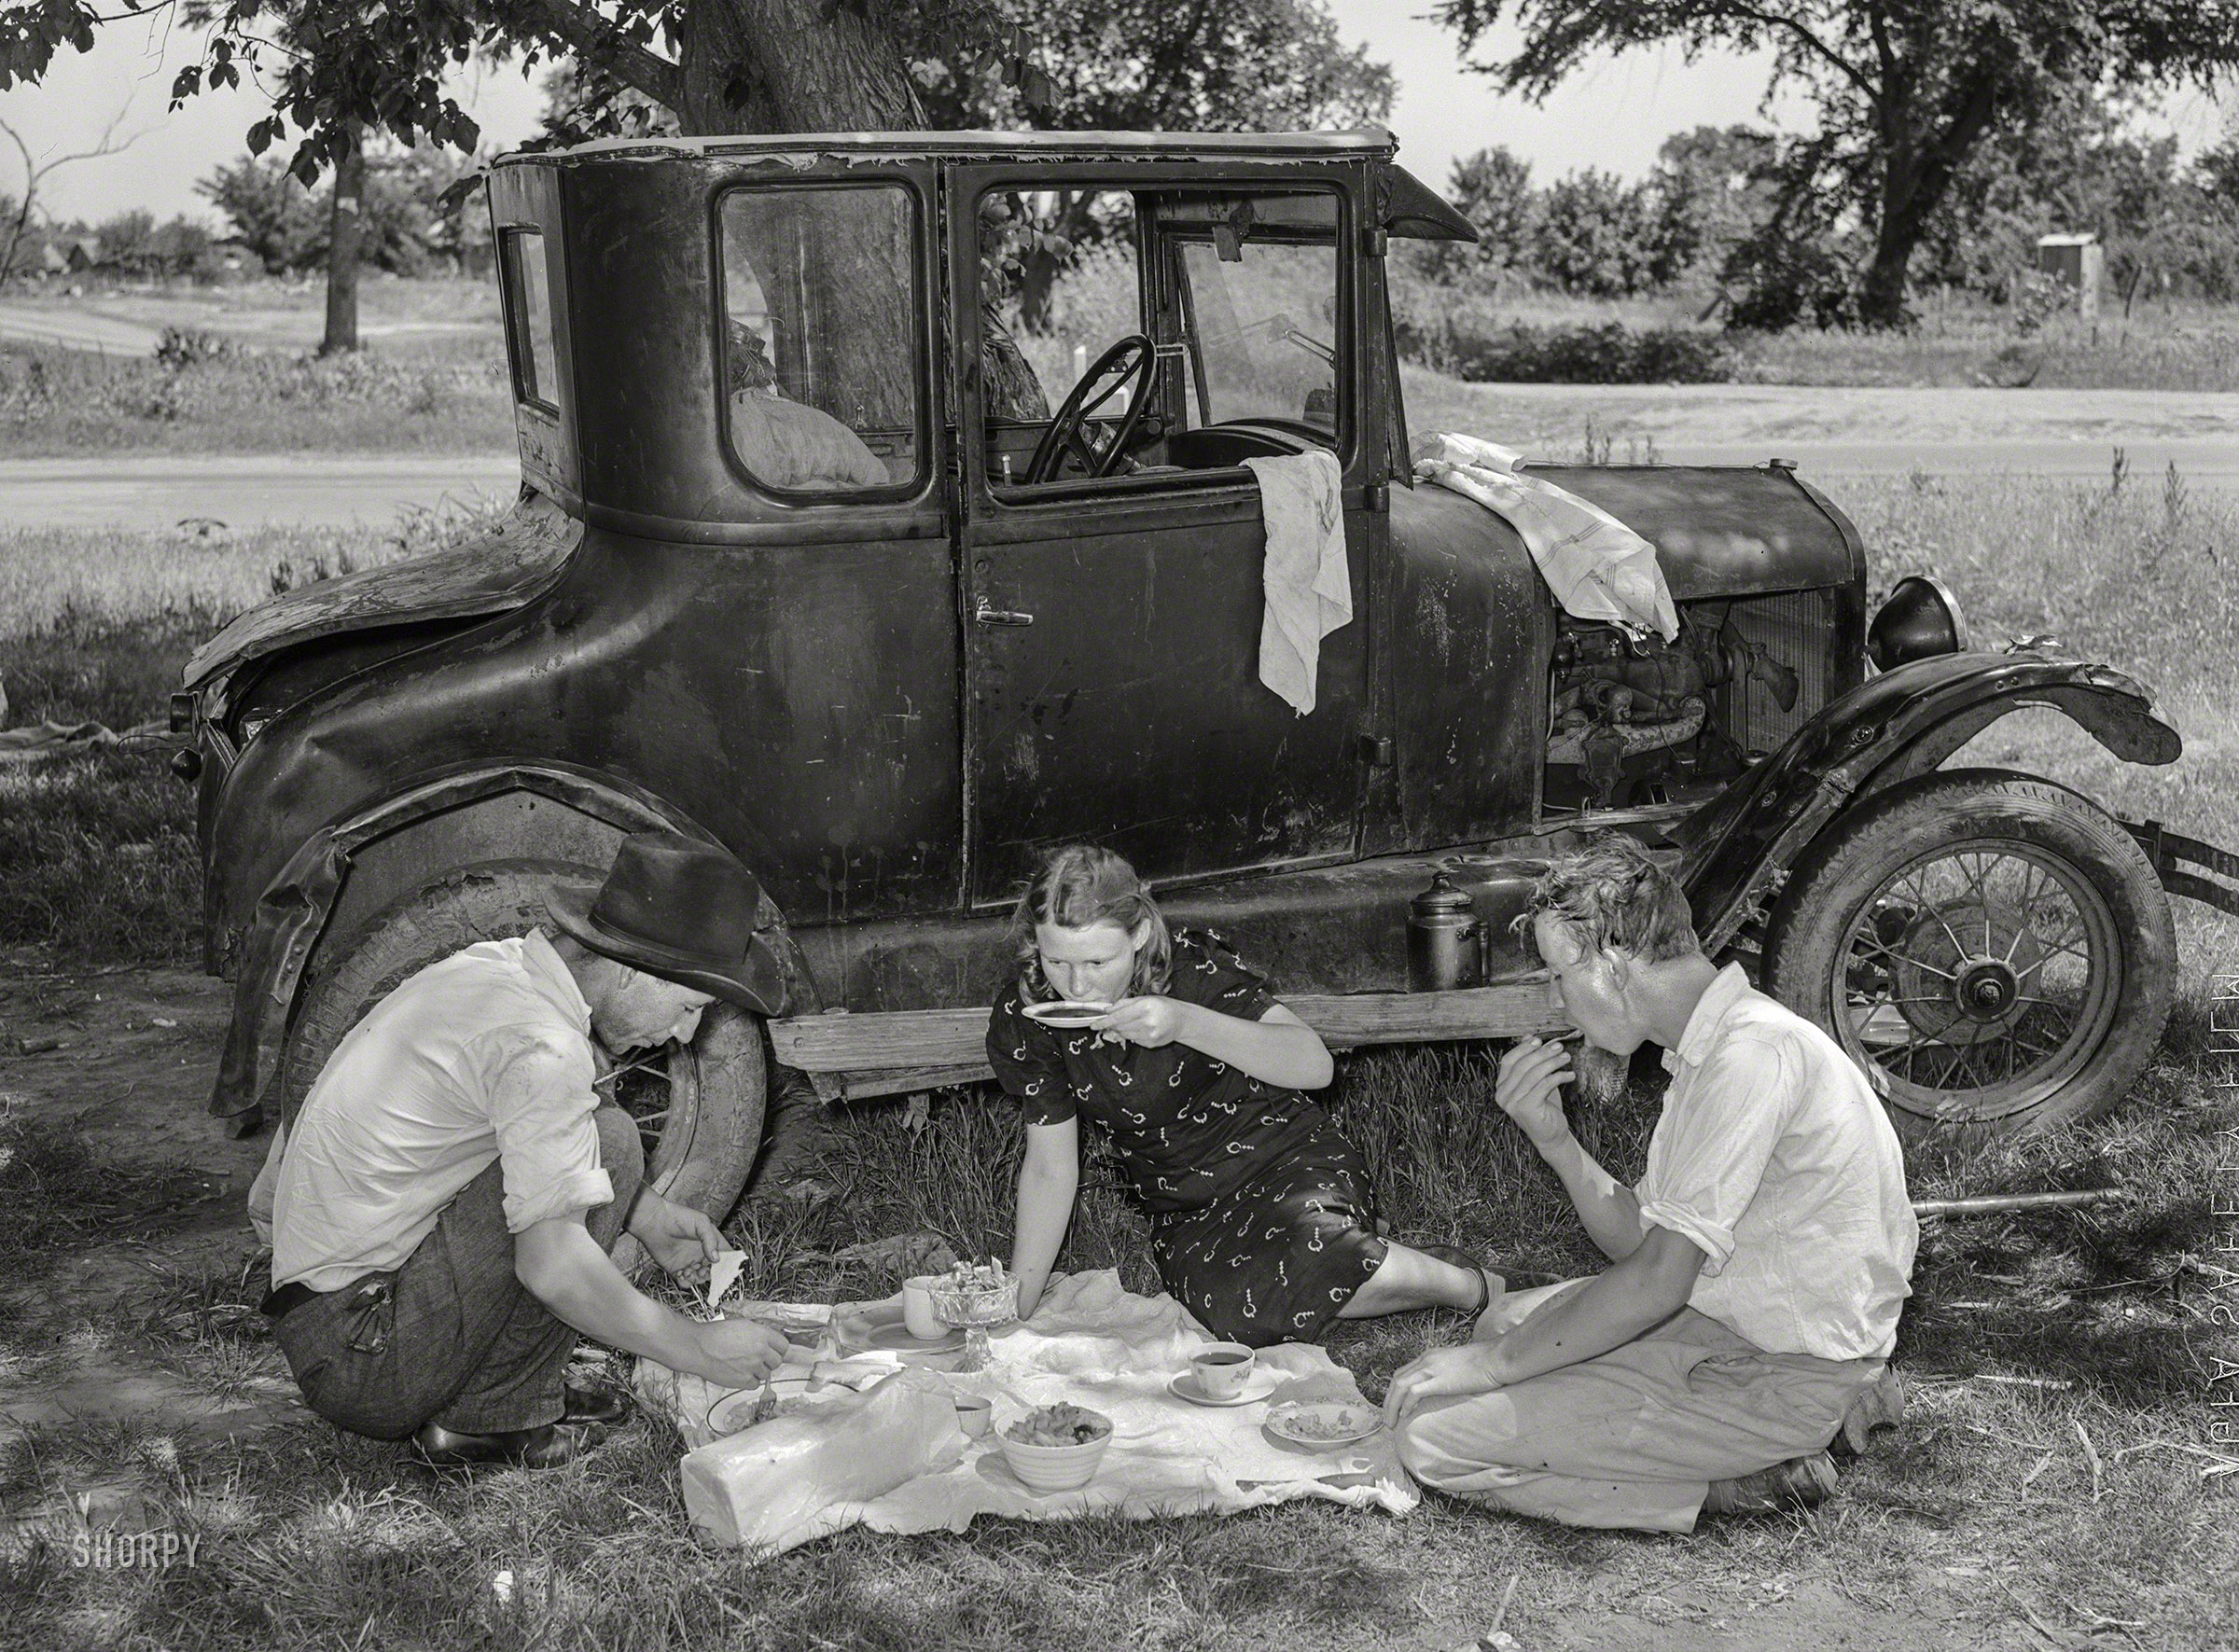 June 1939. "Migrant workers eating dinner by the side of their car (Ford Model T) while they are camped near Prague, Lincoln County, Oklahoma." Medium format negative by Russell Lee for the Farm Security Administration. View full size.